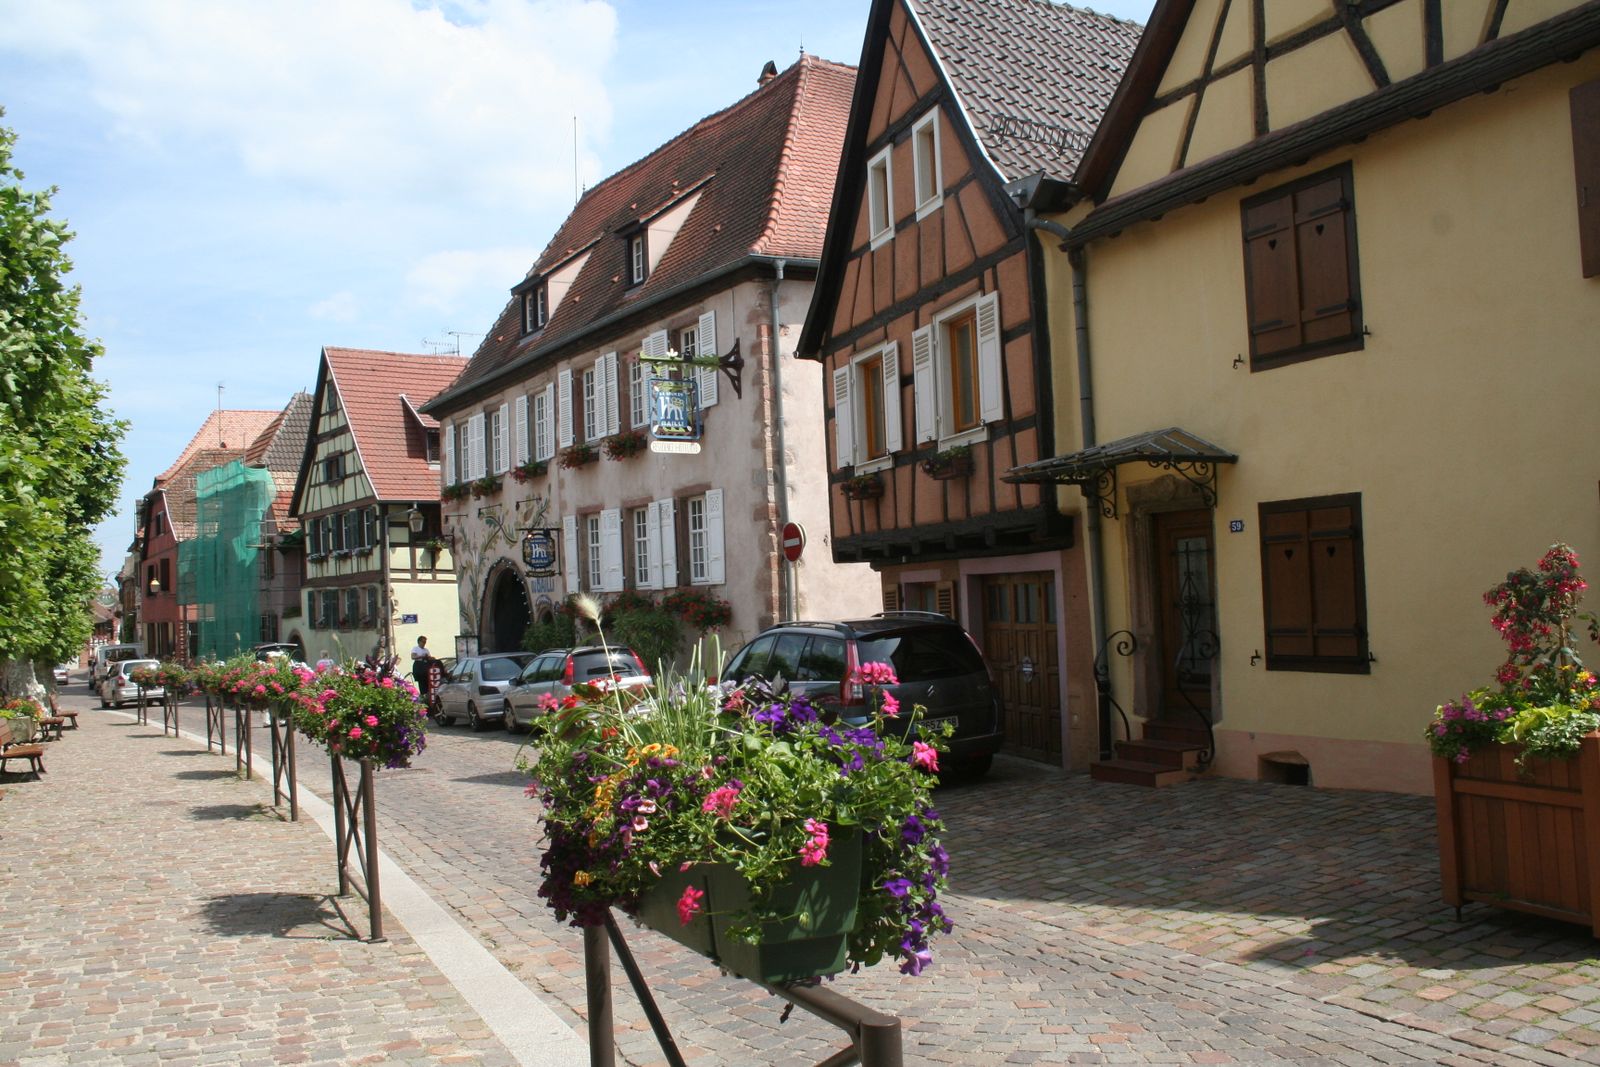 Half-timbered buildings in Alsace